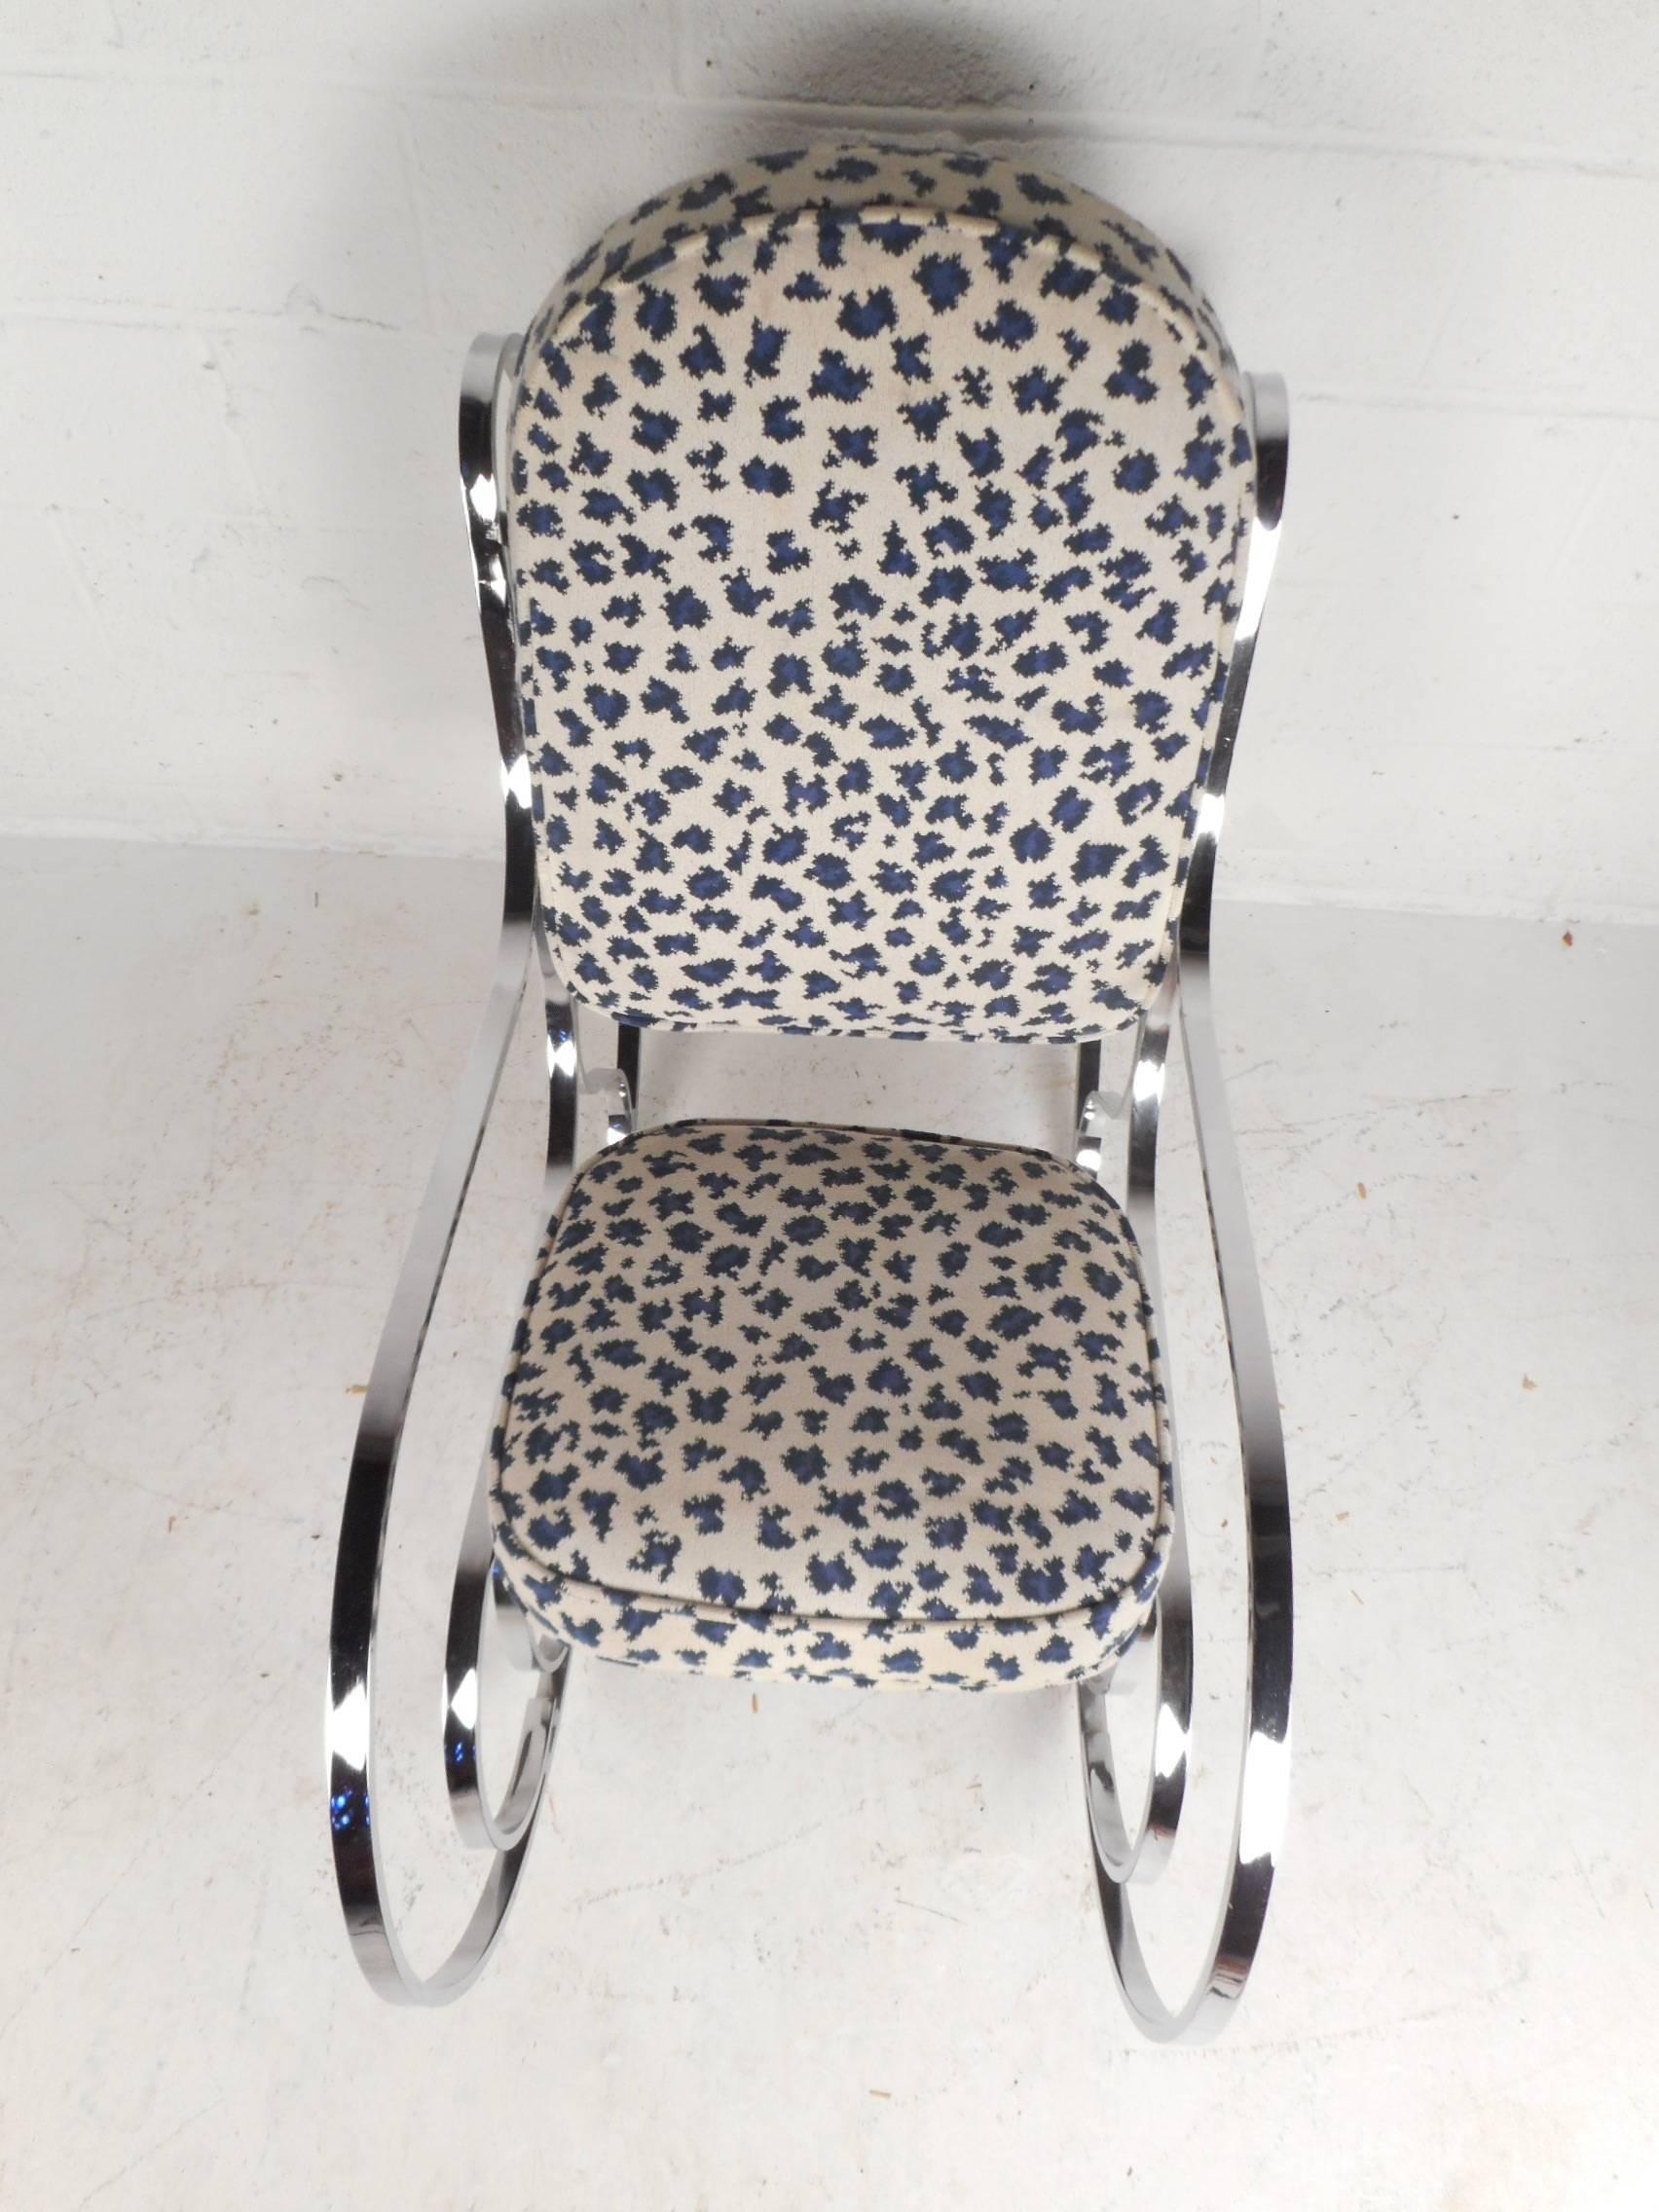 This beautiful vintage modern rocking chair features a heavy flat bar chrome frame and upholstered seating. The stylish white and blue fabric over the thick padded seating provide maximum comfort. The sculpted chrome frame makes this chair the